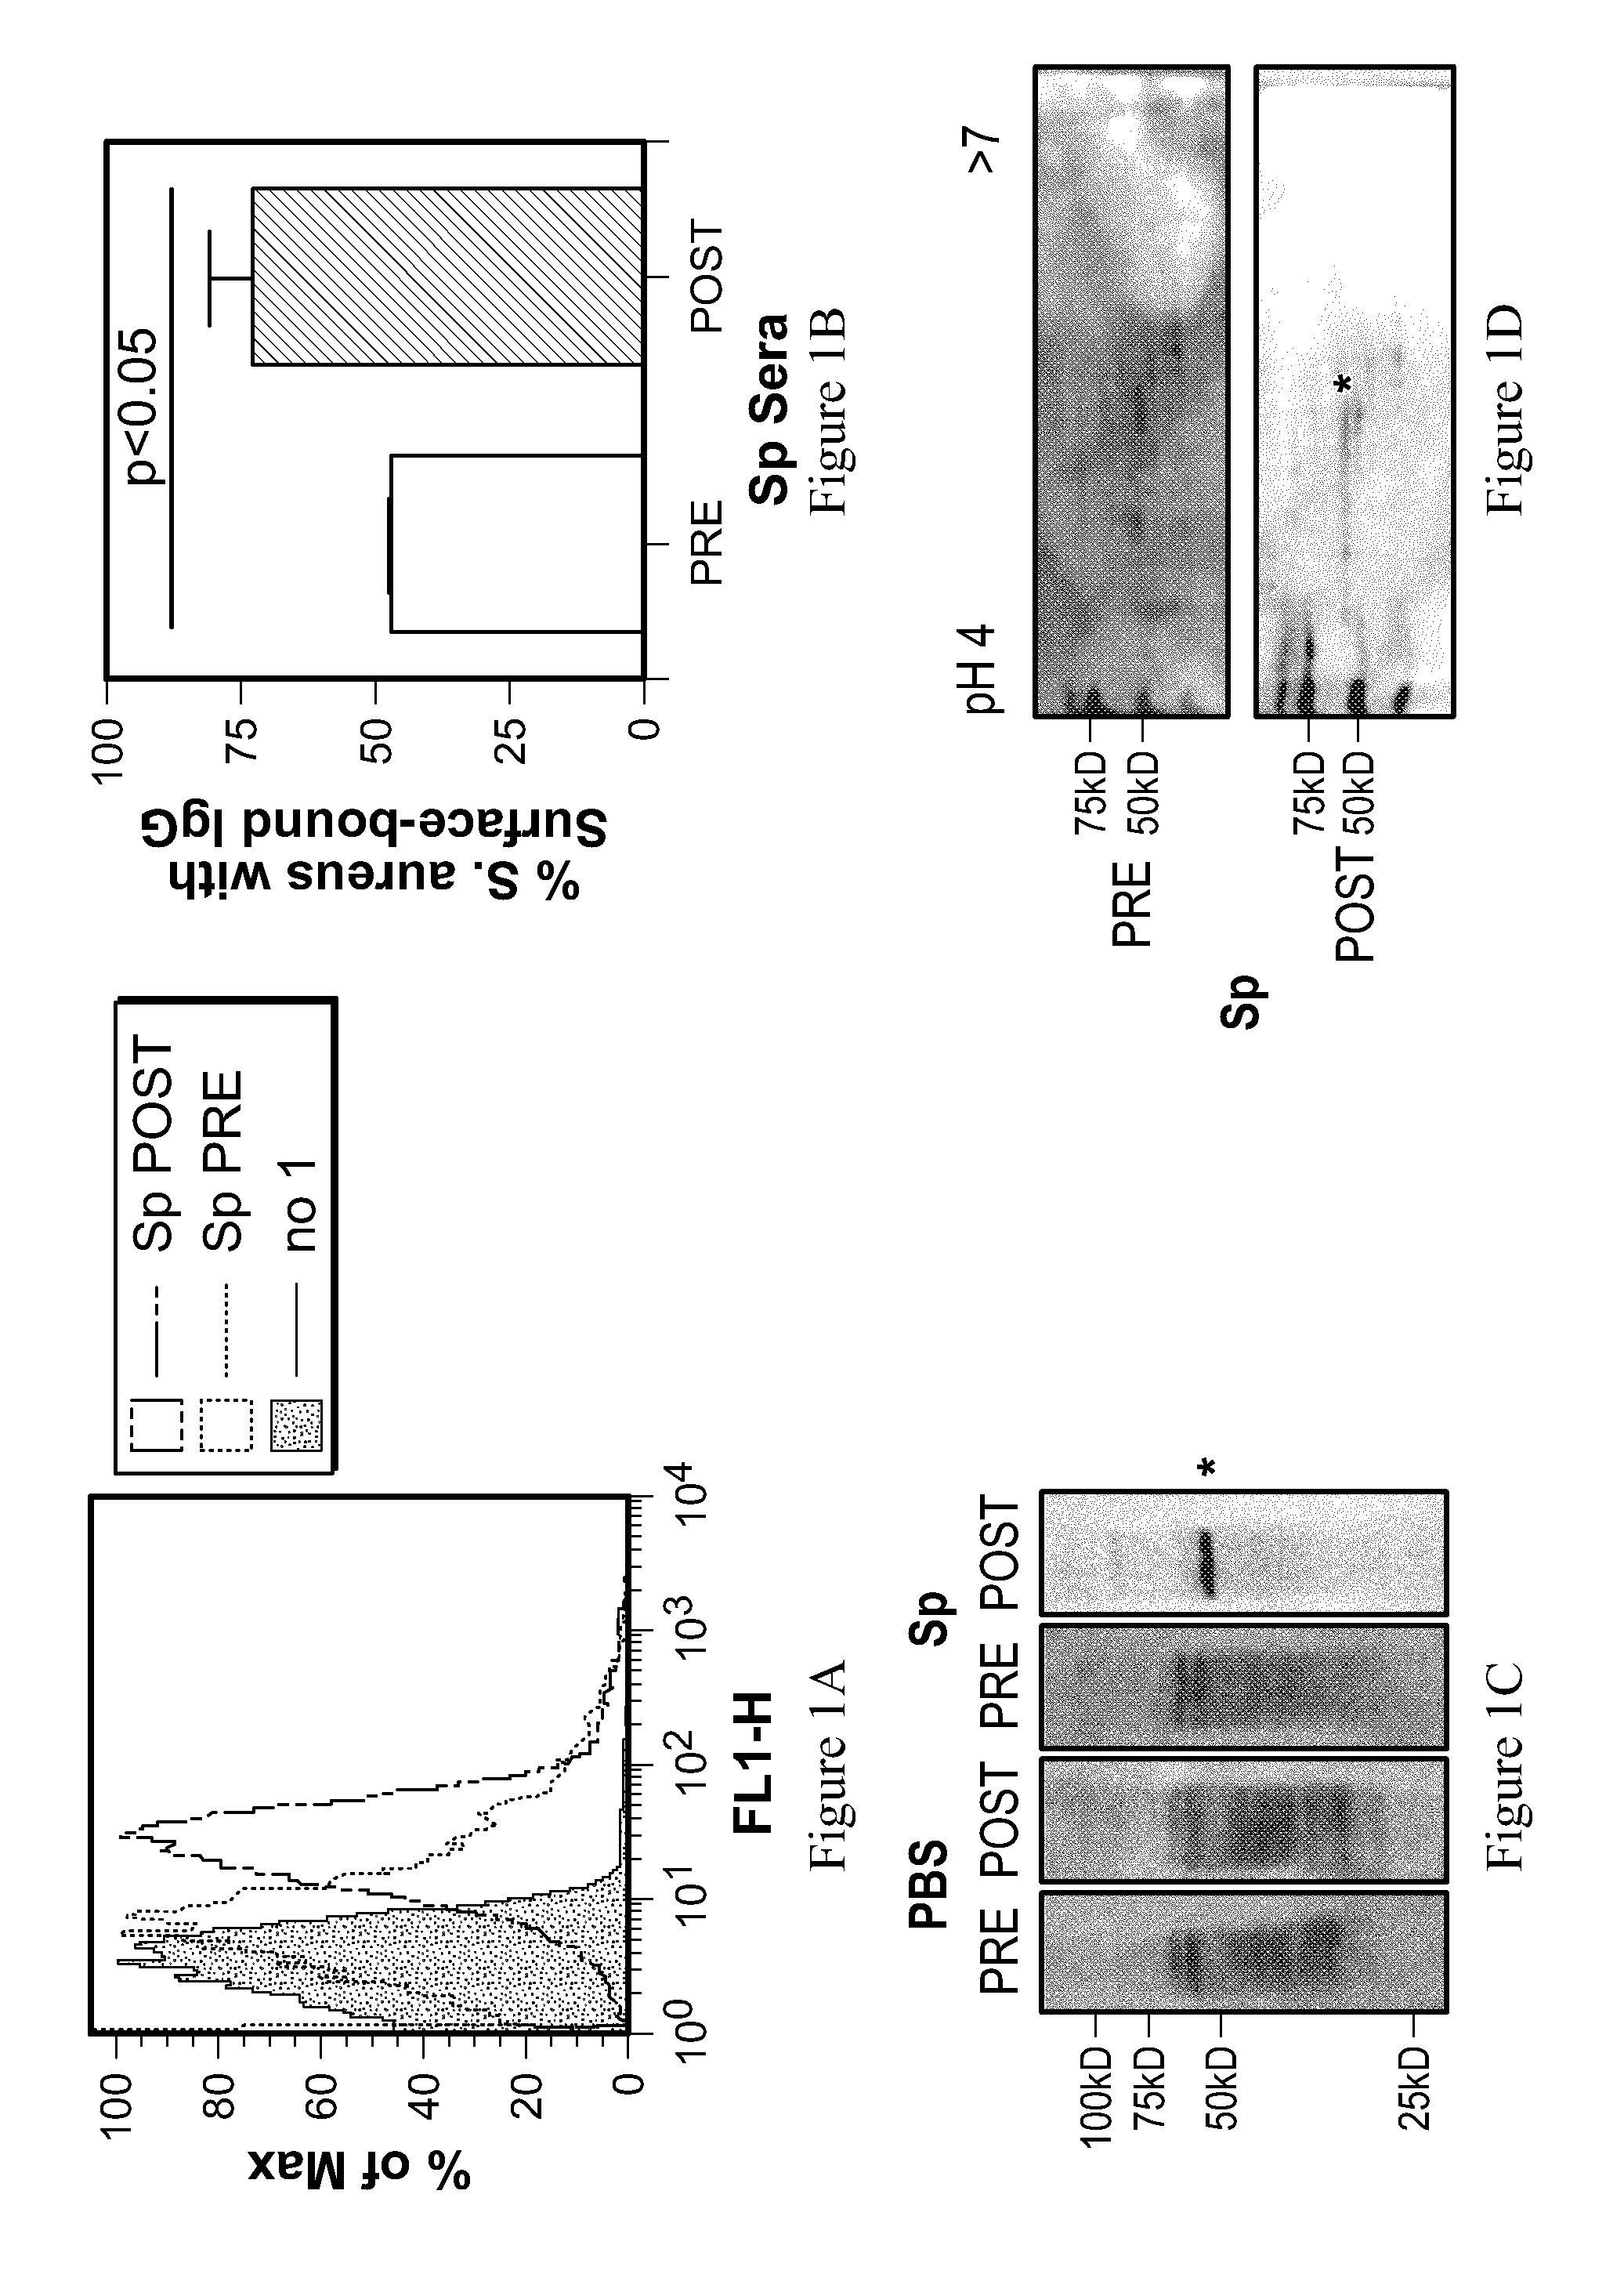 Methods for preventing and treating staphylococcus aureus colonization, infection, and disease